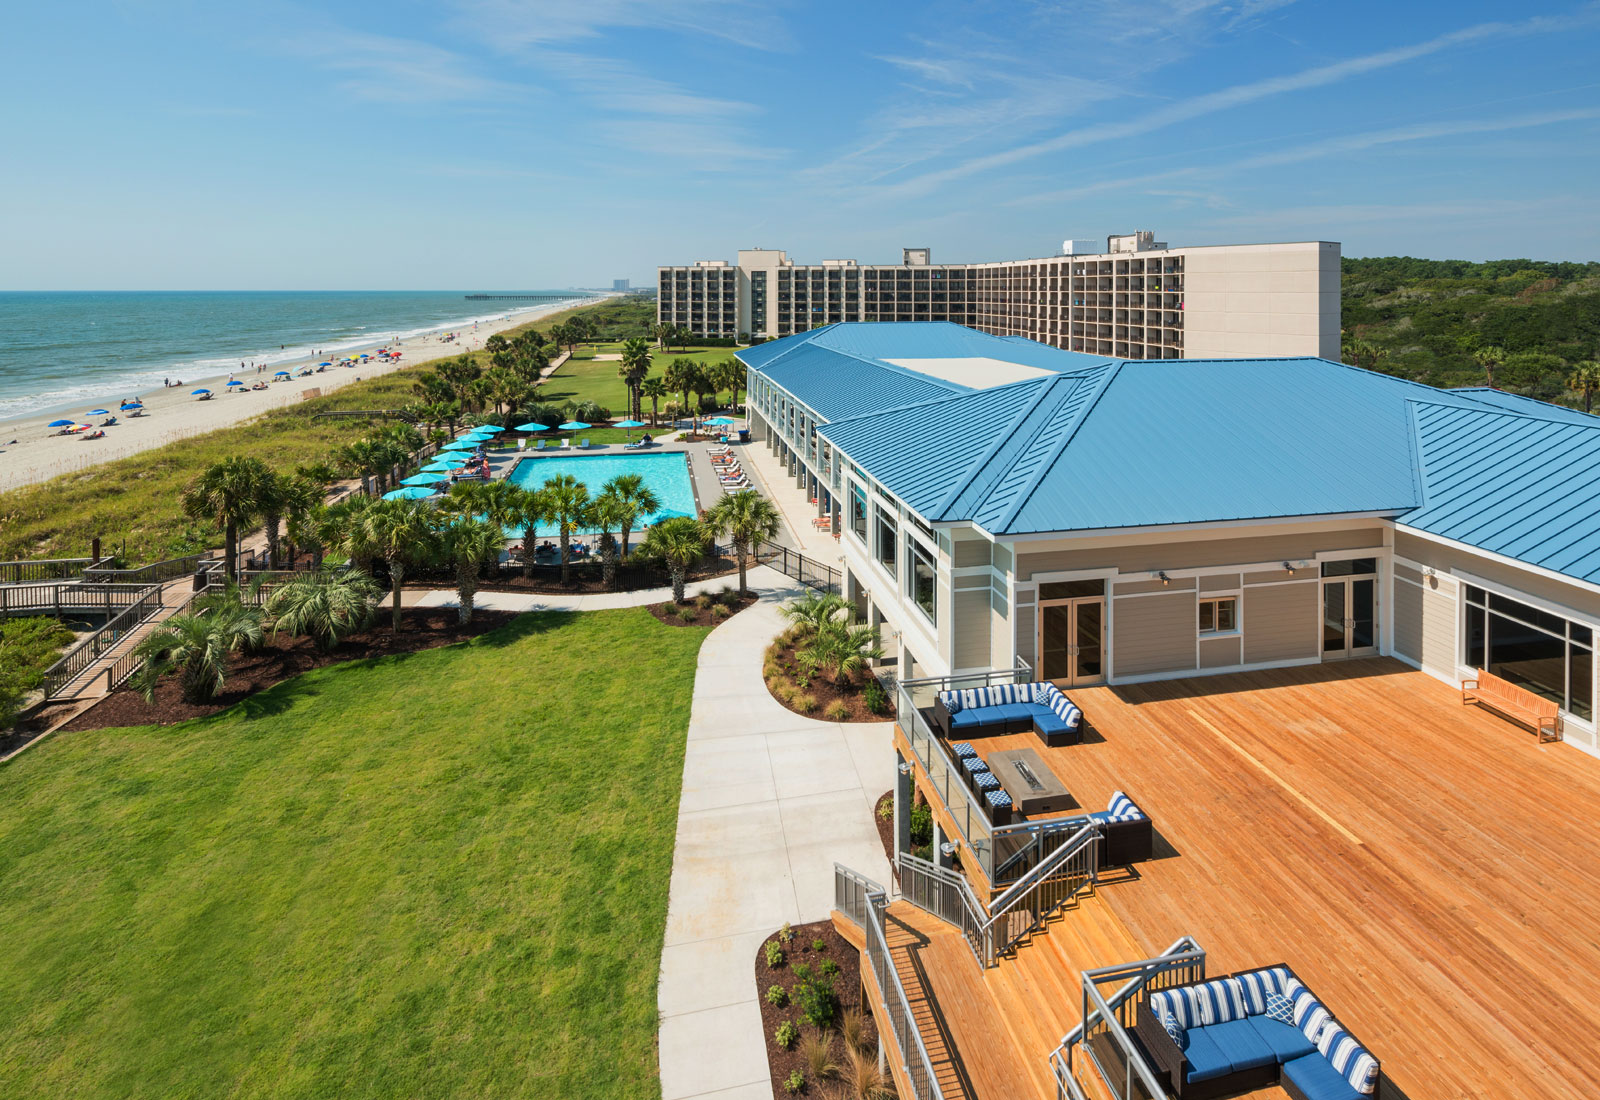 The DoubleTree Resort by Hilton, Myrtle Beach Oceanfront, Tee Up to Grand Strand Hotel for Holiday Fun